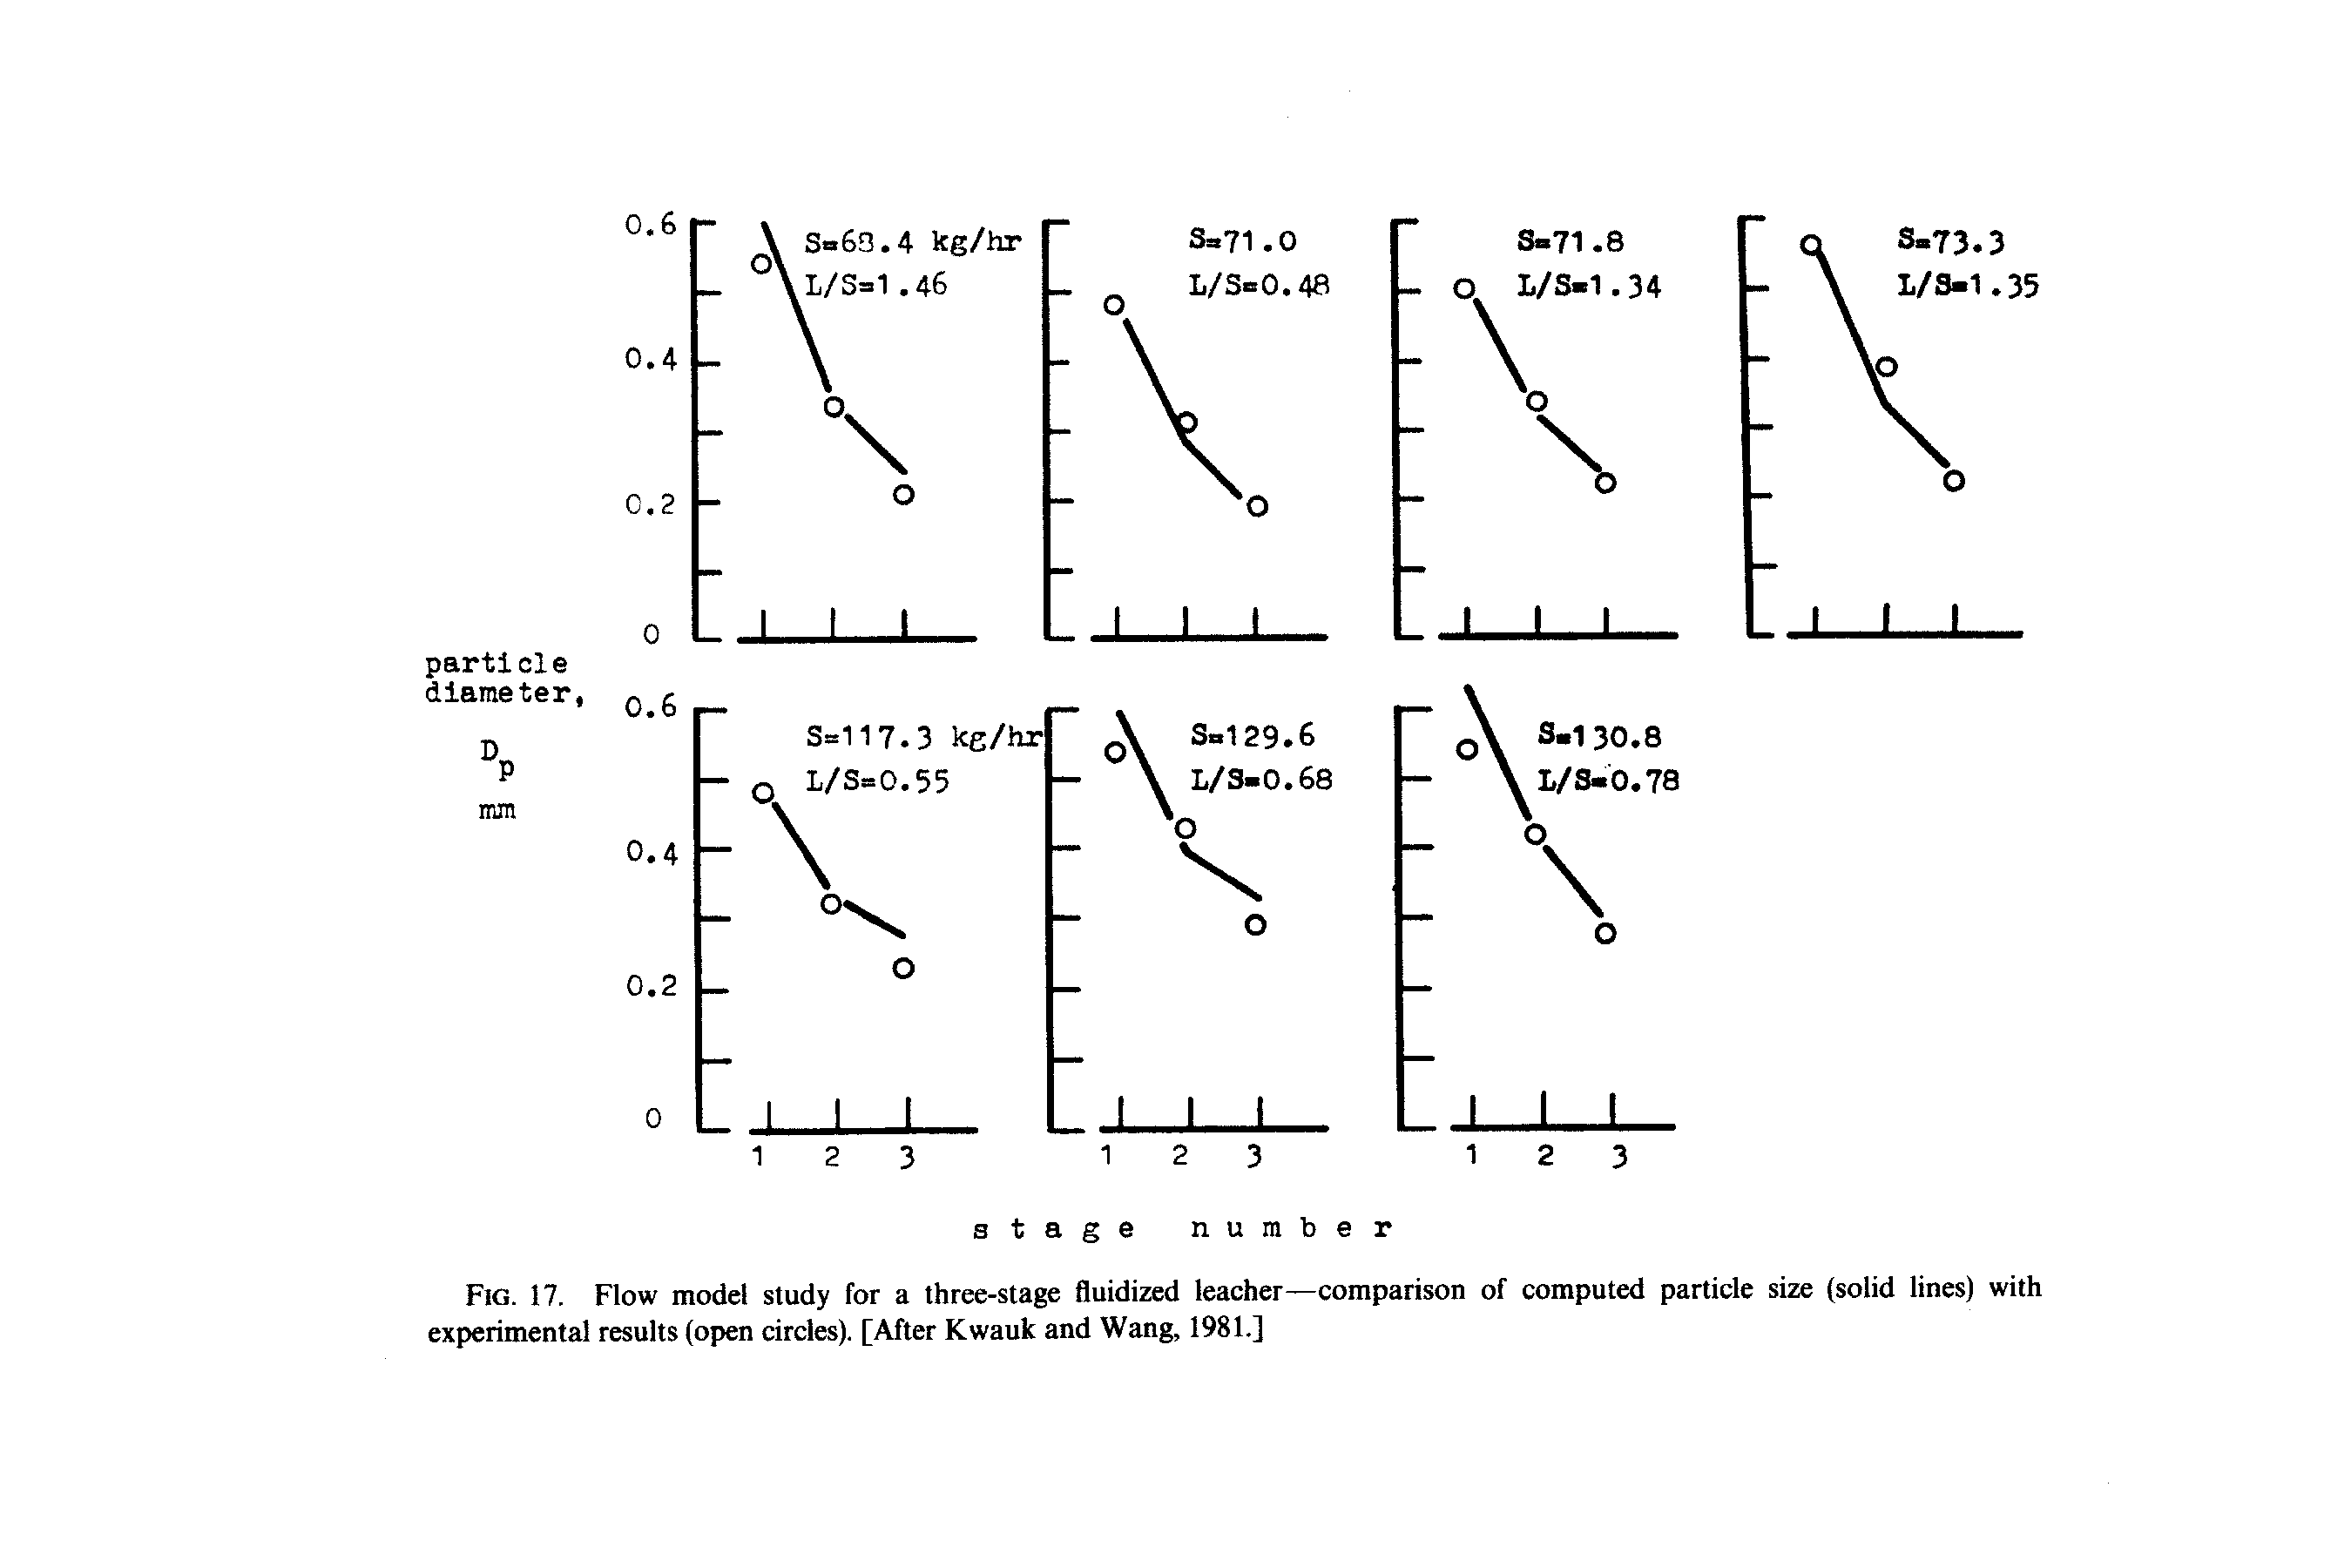 Fig. 17. Flow model study for a three-stage fluidized leacher—comparison of computed particle size (solid lines) with experimental results (open circles). [After Kwauk and Wang, 1981.]...